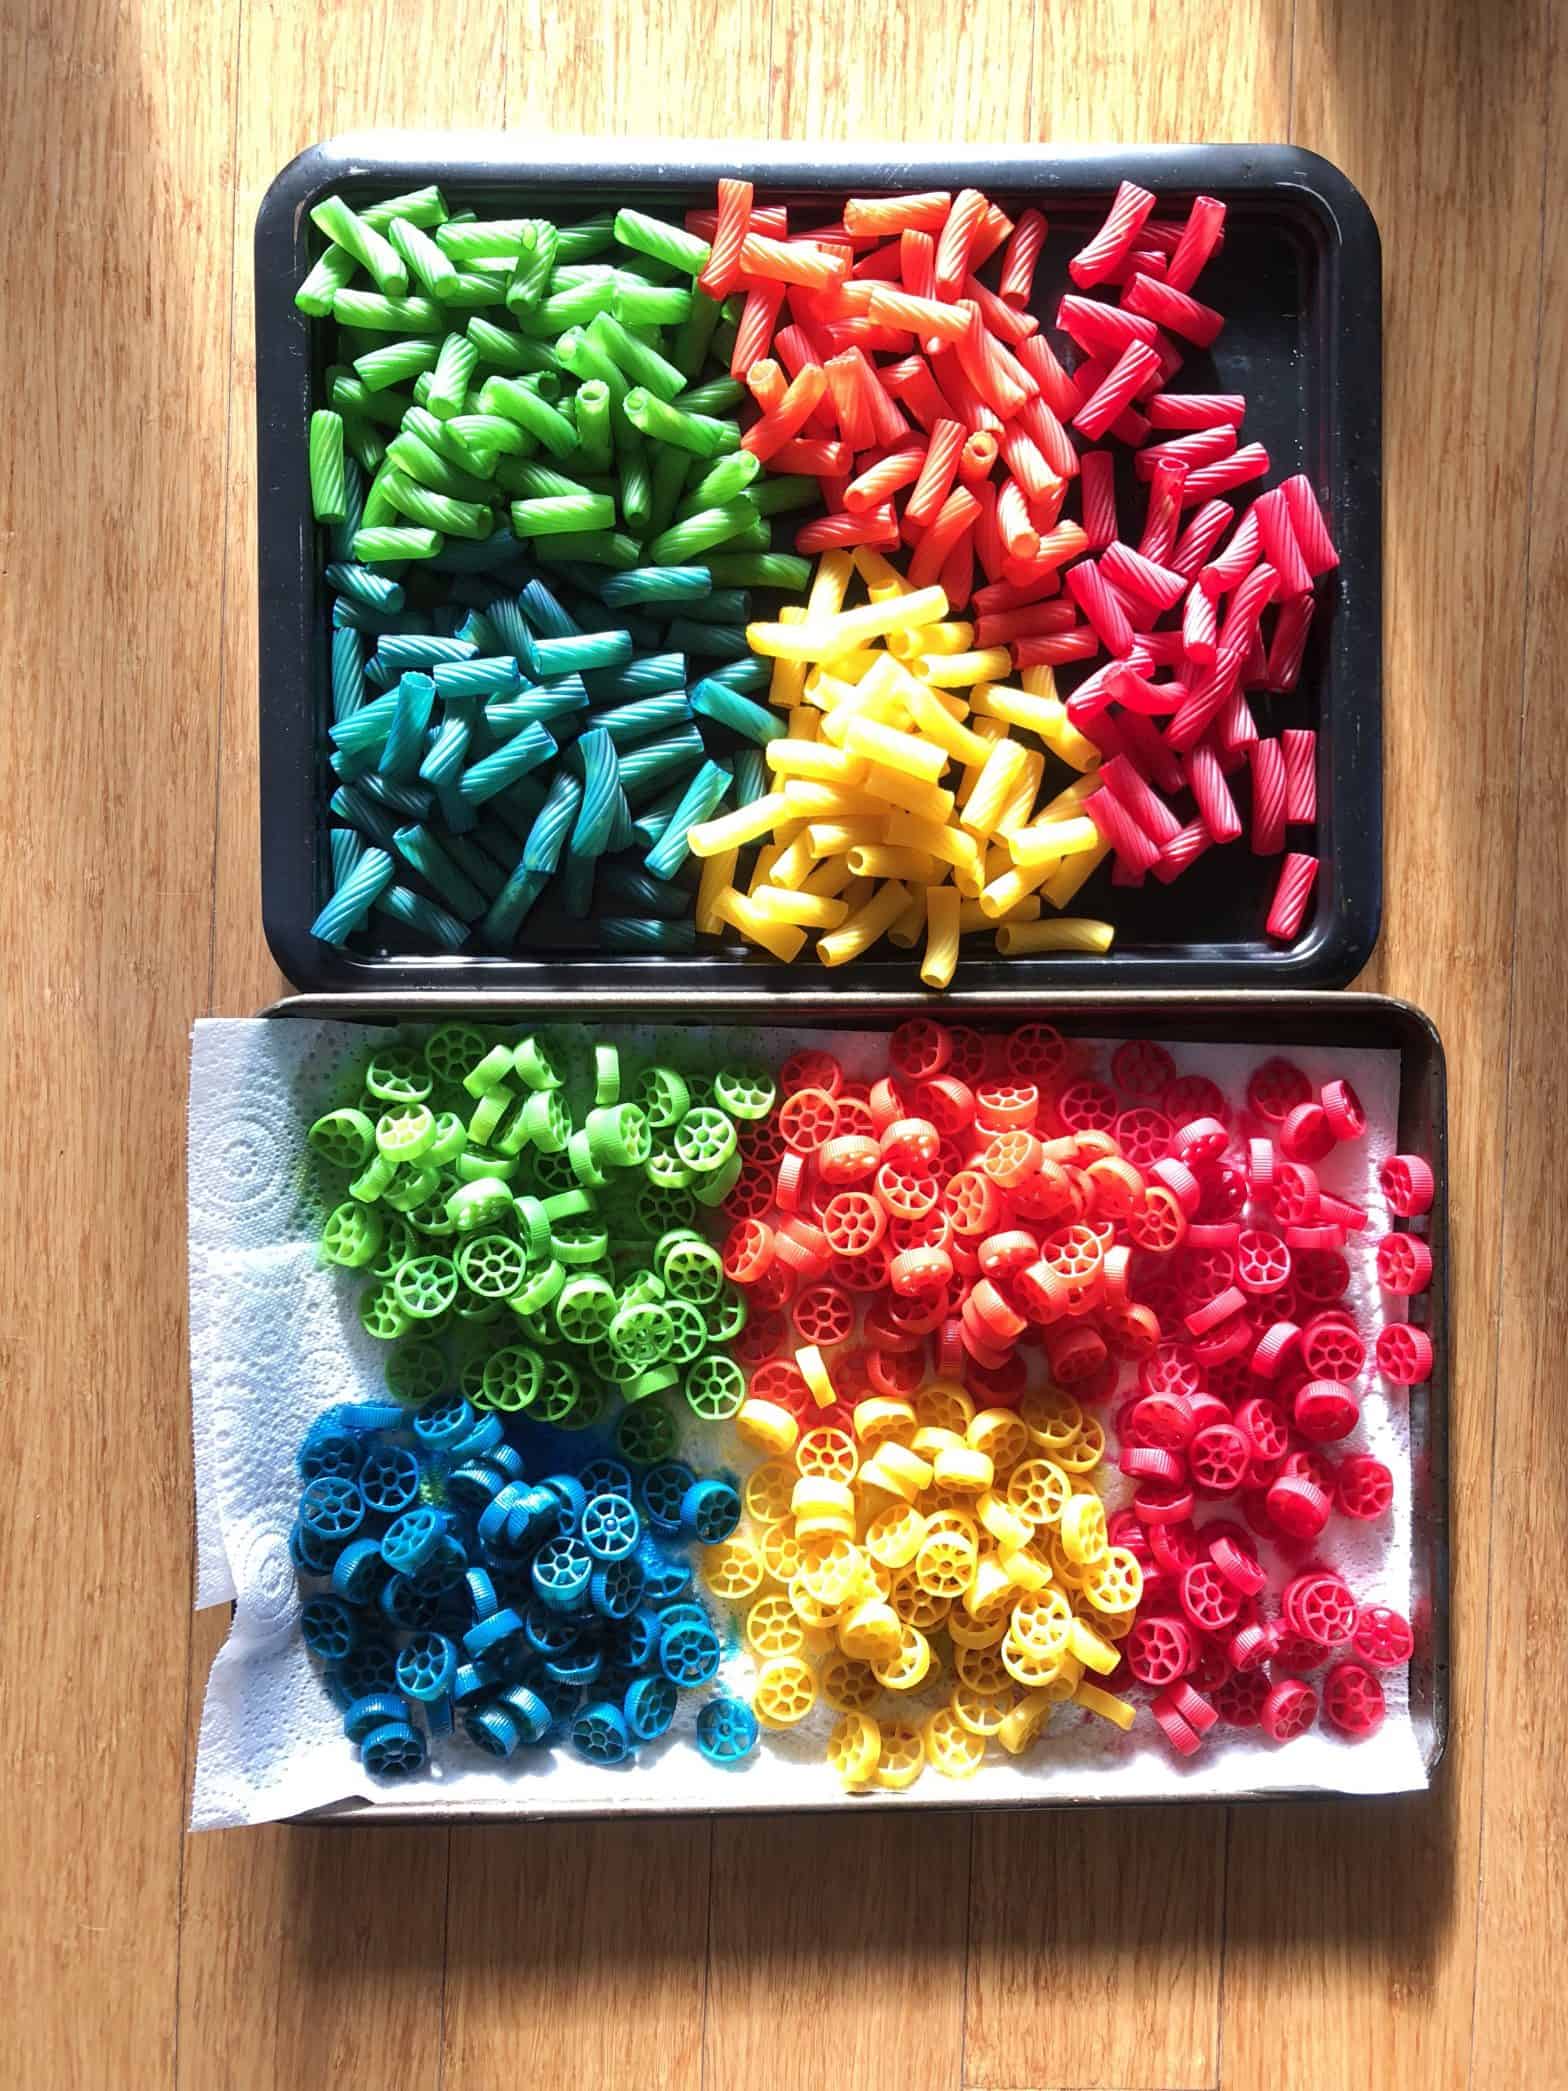 How to Colour Pasta for Sensory Play